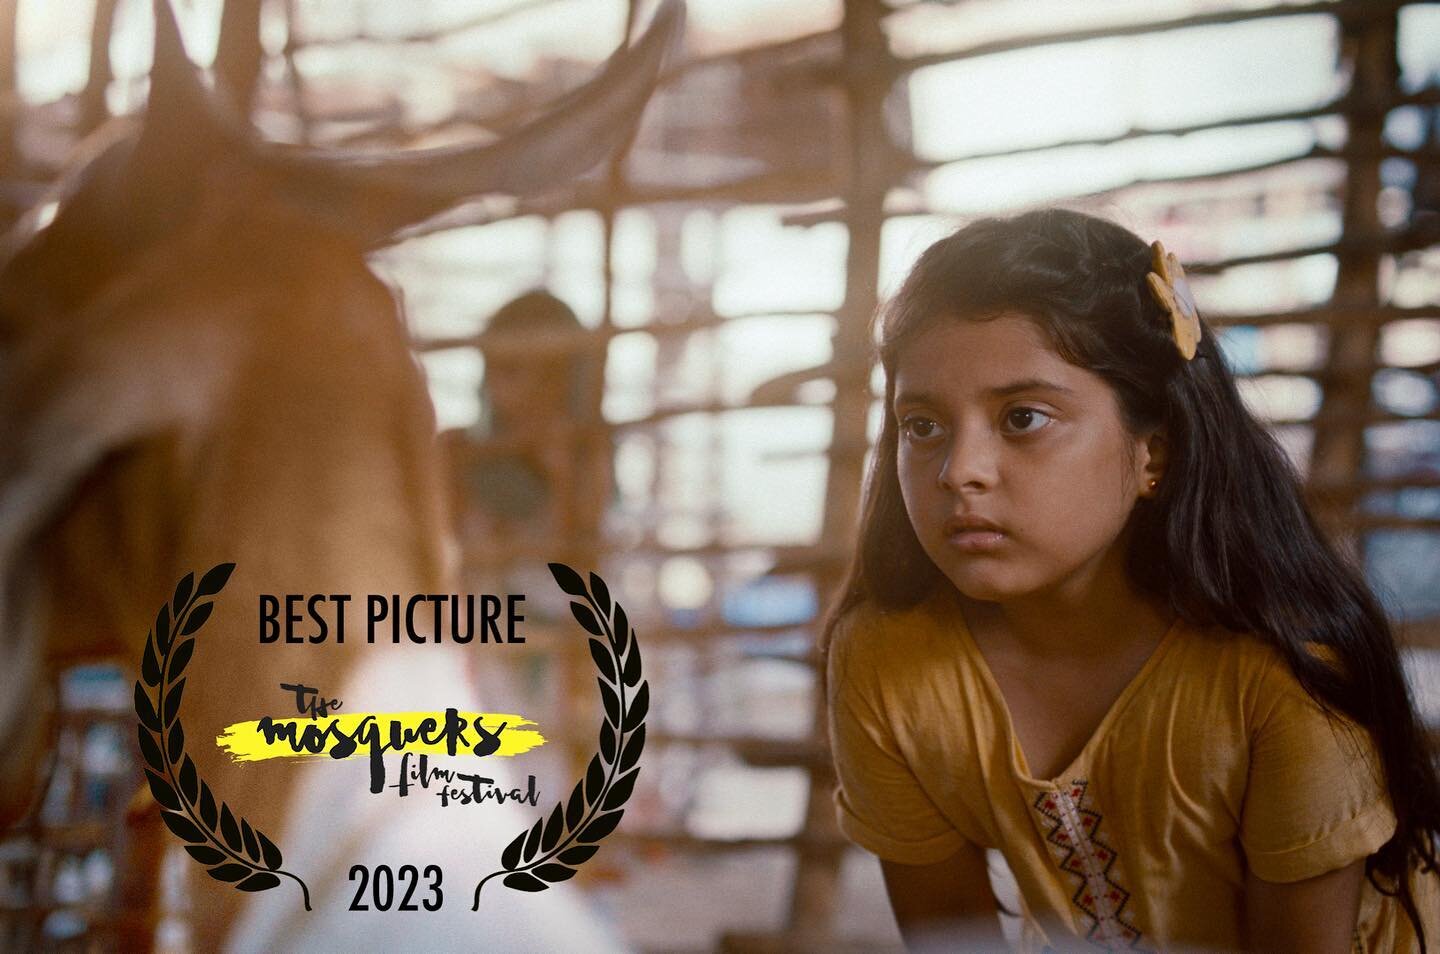 We are so extremely proud to have won Best Picture at the 2023 Mosquers Film Festival. Thank you to the amazingly kind team at @mosquersfilmfest and the unbelievable crowd at the festival. It is always such a treat to watch our film with our Muslim c